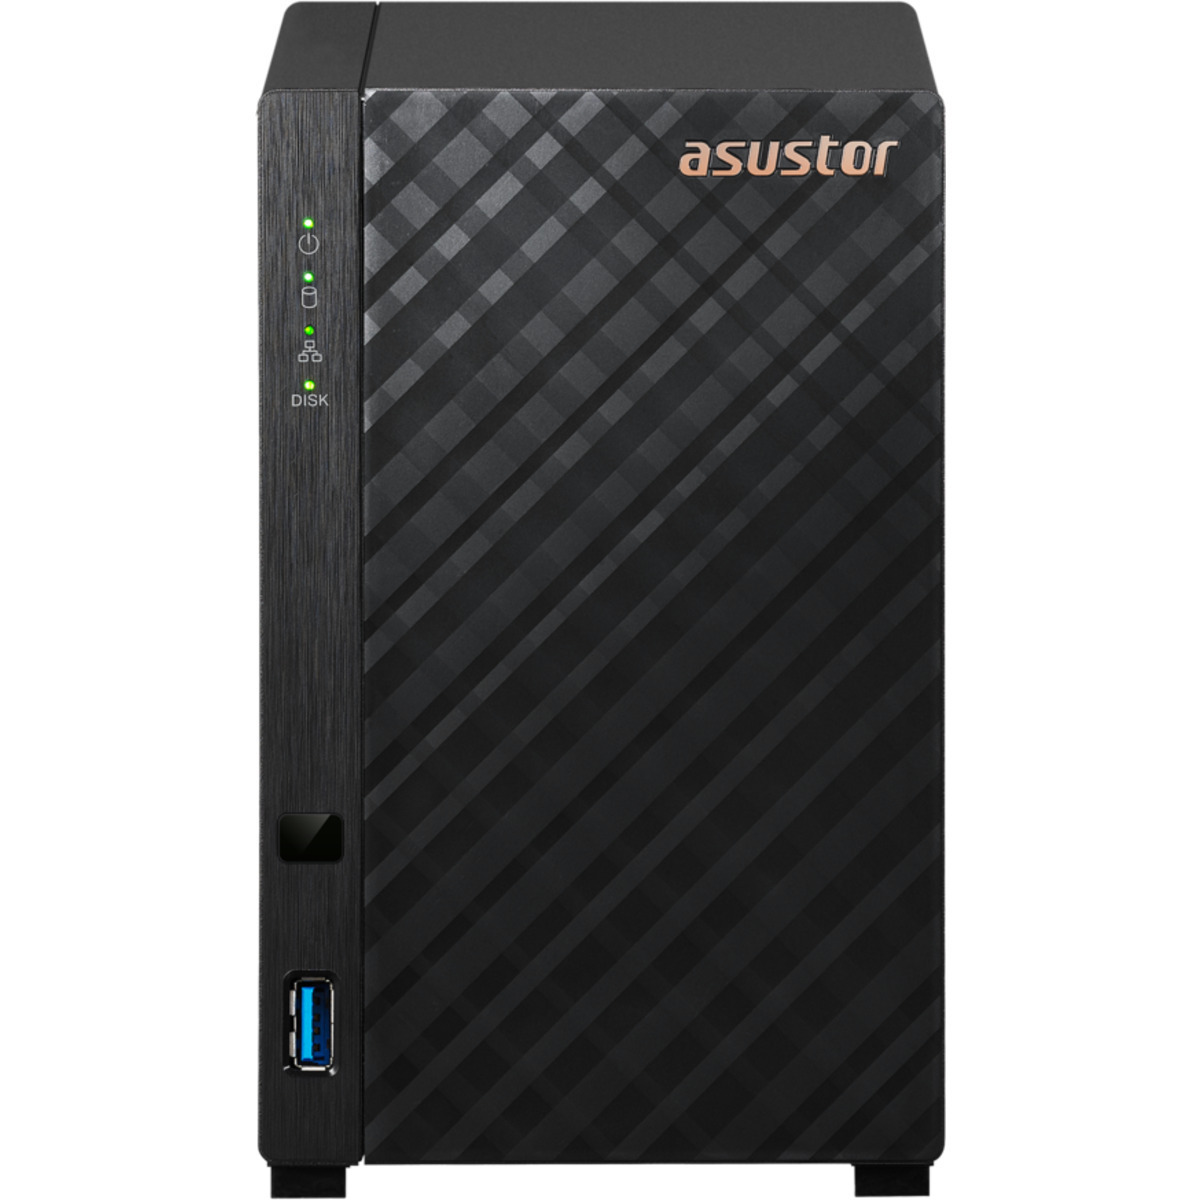 ASUSTOR DRIVESTOR 2 Lite AS1102TL 48tb 2-Bay Desktop Personal / Basic Home / Small Office NAS - Network Attached Storage Device 2x24tb Western Digital Red Pro WD240KFGX 3.5 7200rpm SATA 6Gb/s HDD NAS Class Drives Installed - Burn-In Tested DRIVESTOR 2 Lite AS1102TL